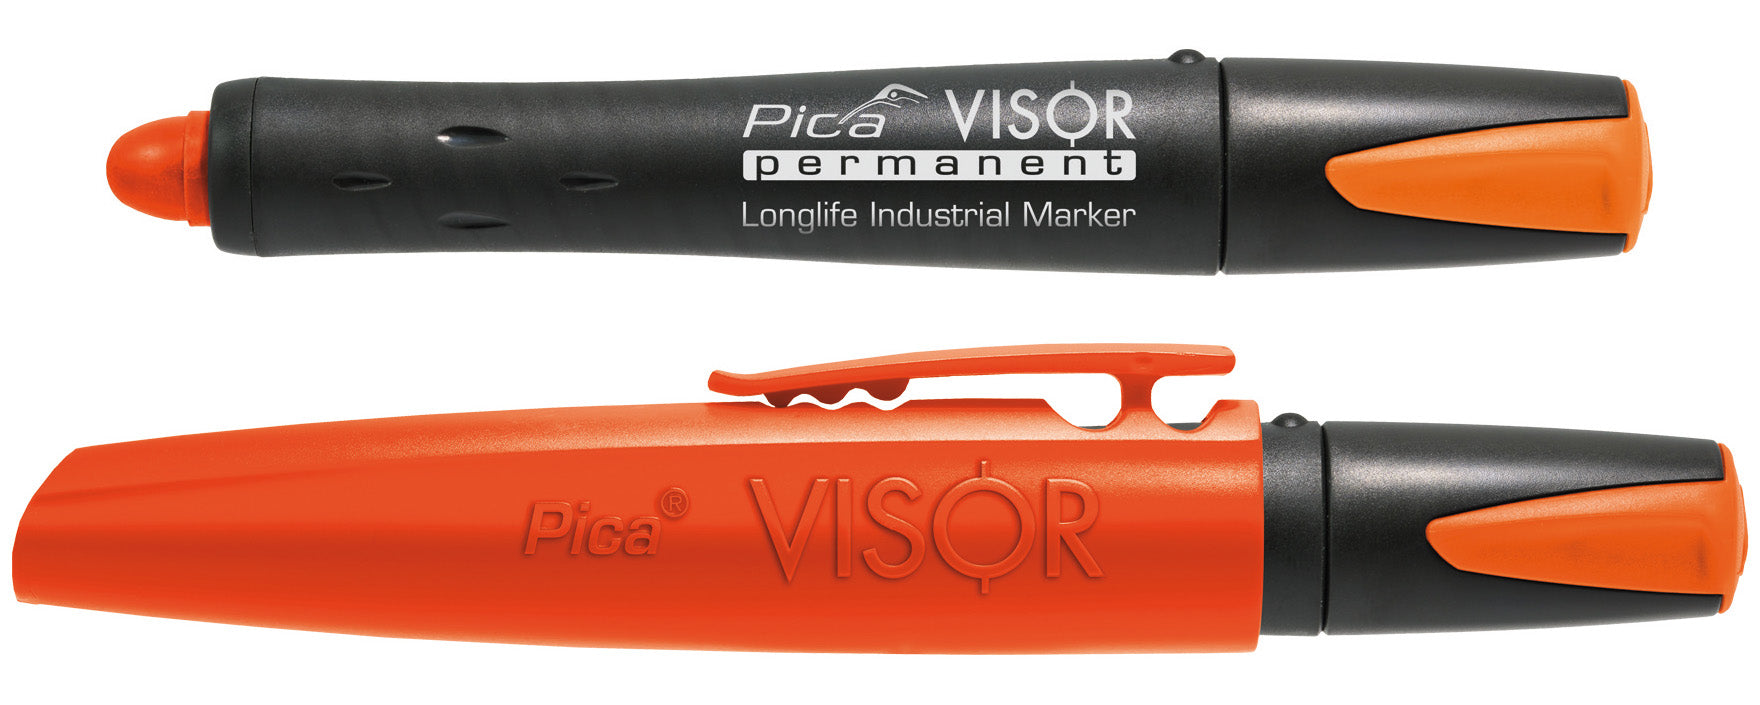 Pica VISOR permanent Longlife Industrial Marker Power Tool Services